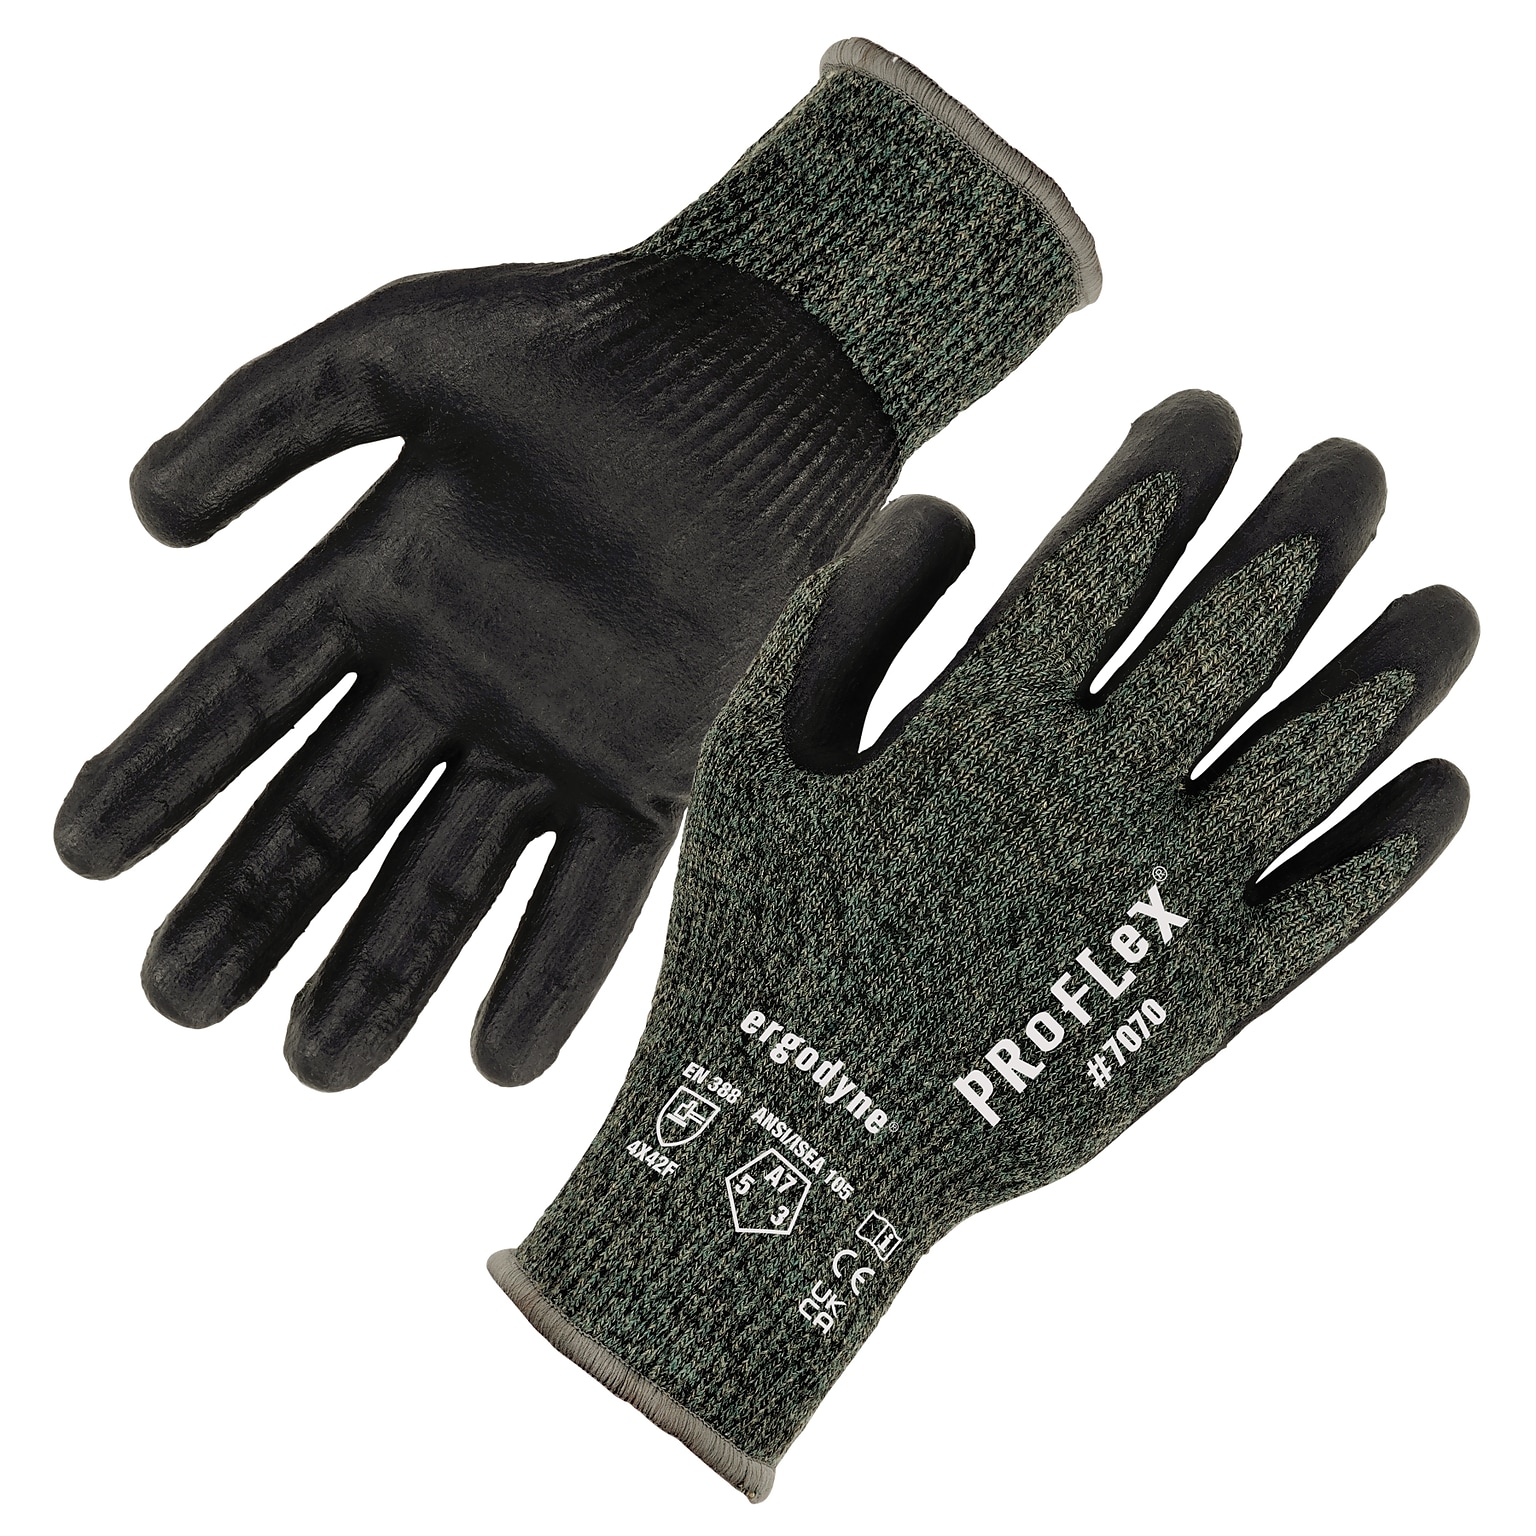 Ergodyne ProFlex 7070 Nitrile Coated Cut-Resistant Gloves, ANSI A7, Heat Resistant, Green, Small, 1 Pair (18042)